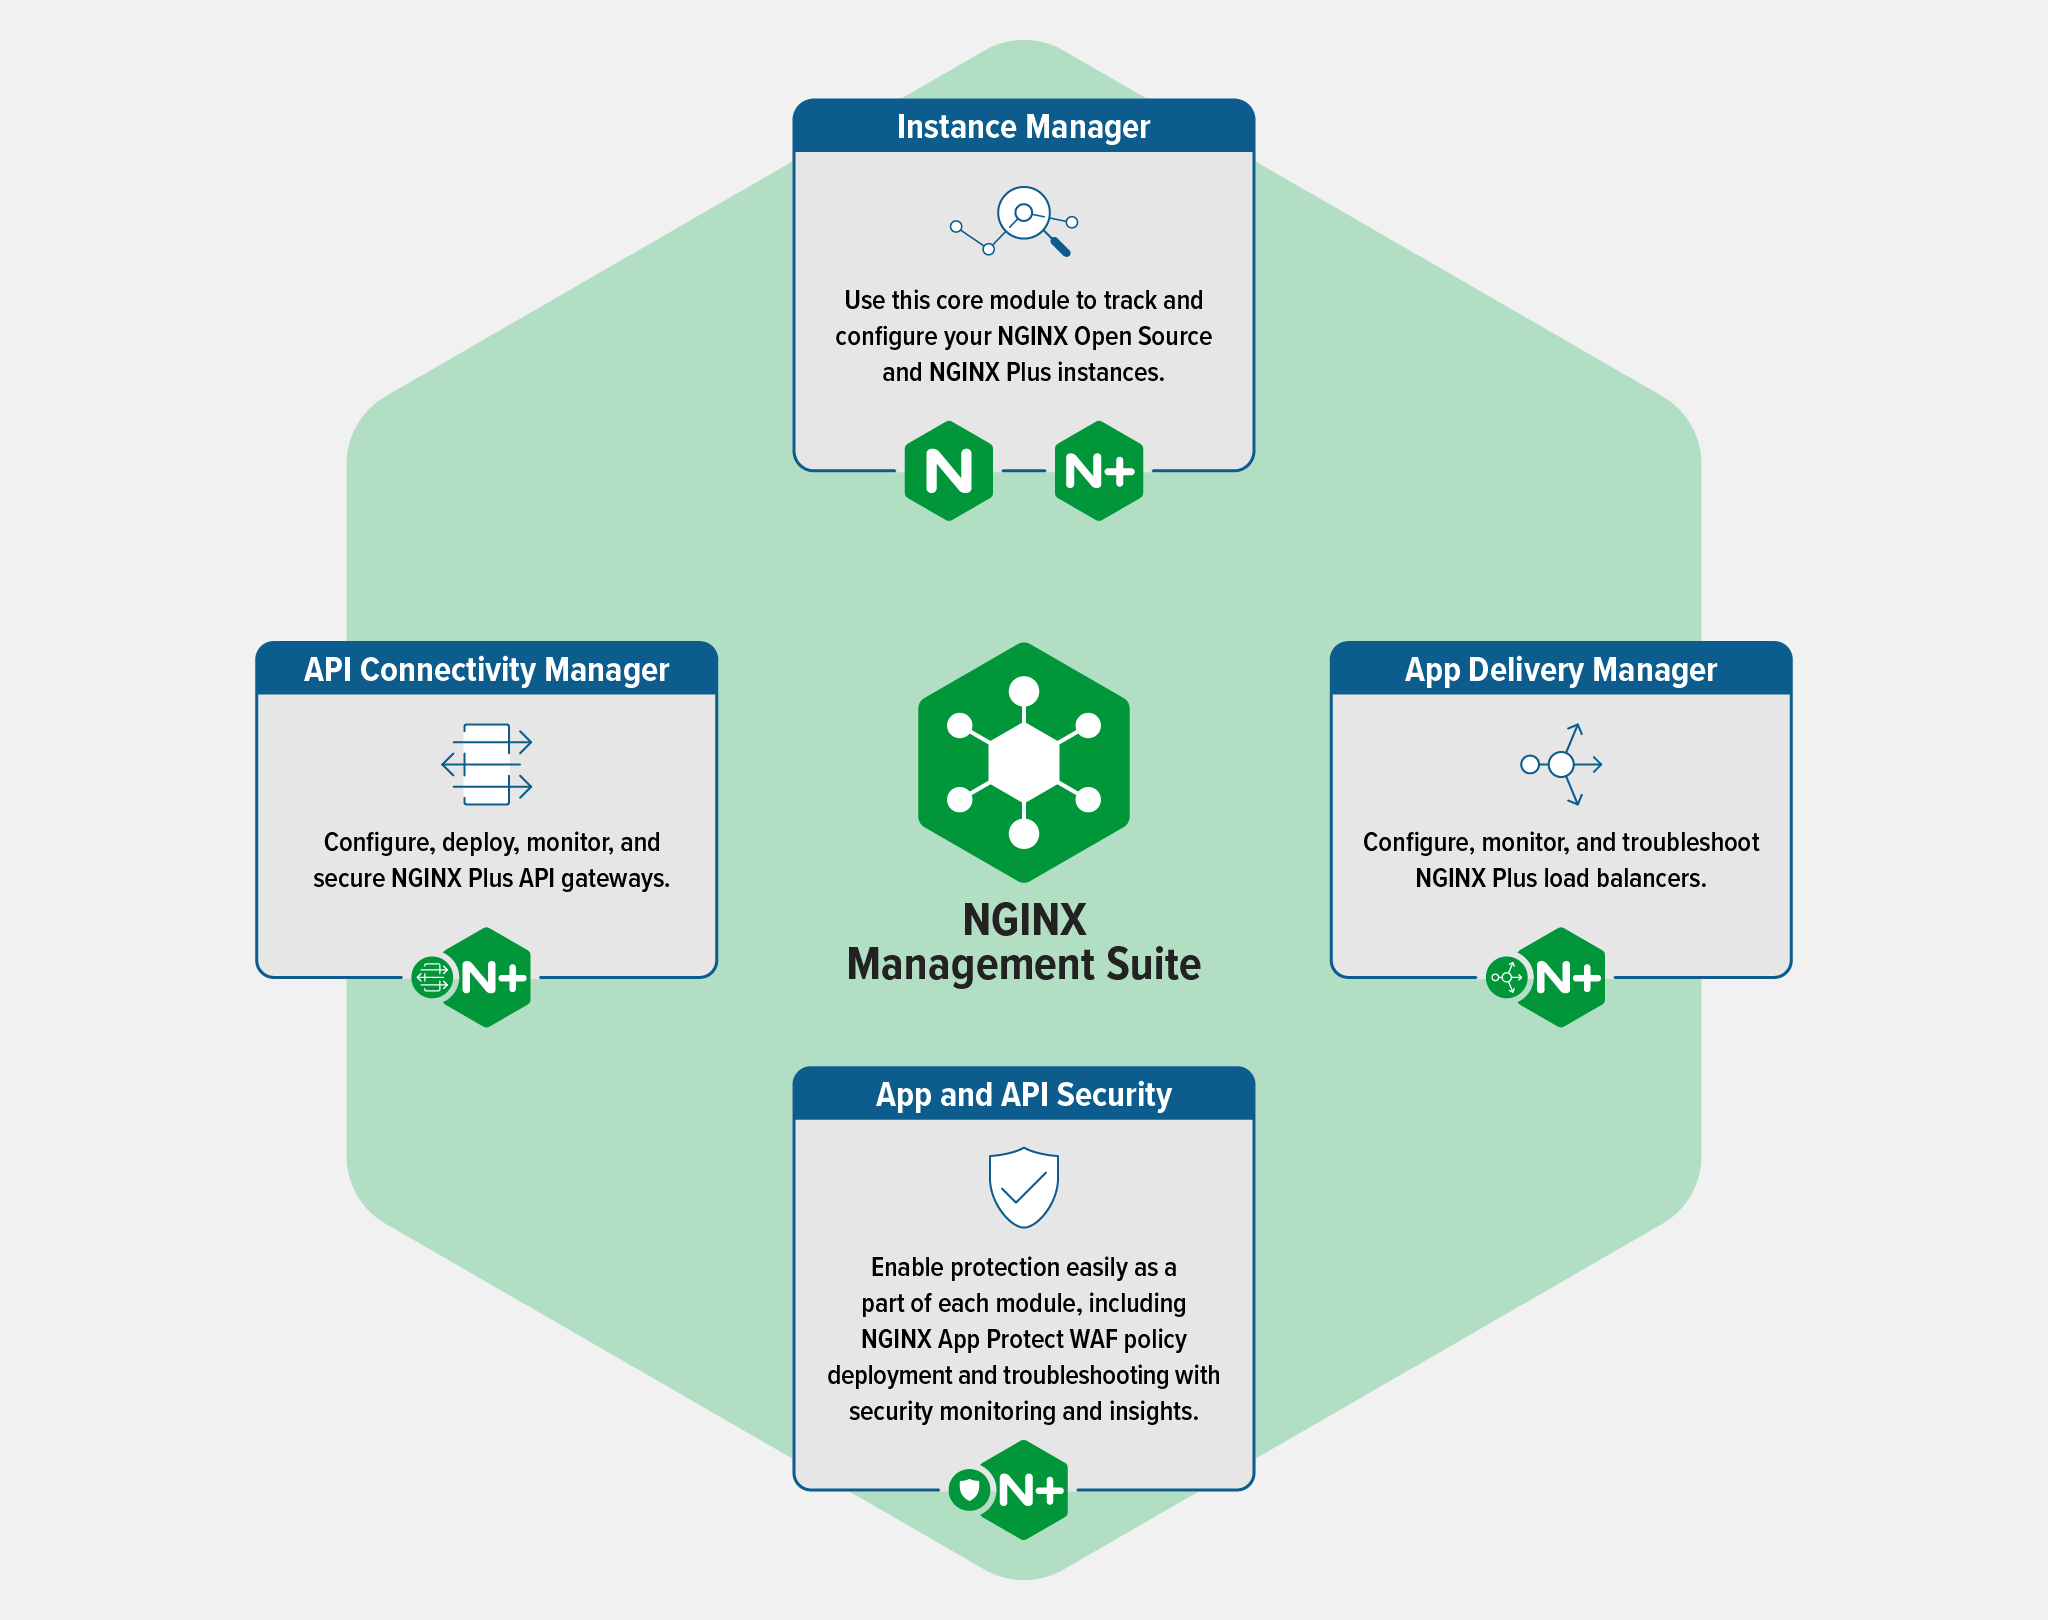 Diagram showing the NGINX Management Suite modules at the launch of version 1.0: Instance Manager, API Connectivity Manager, App Delivery Manager, and API and App Security